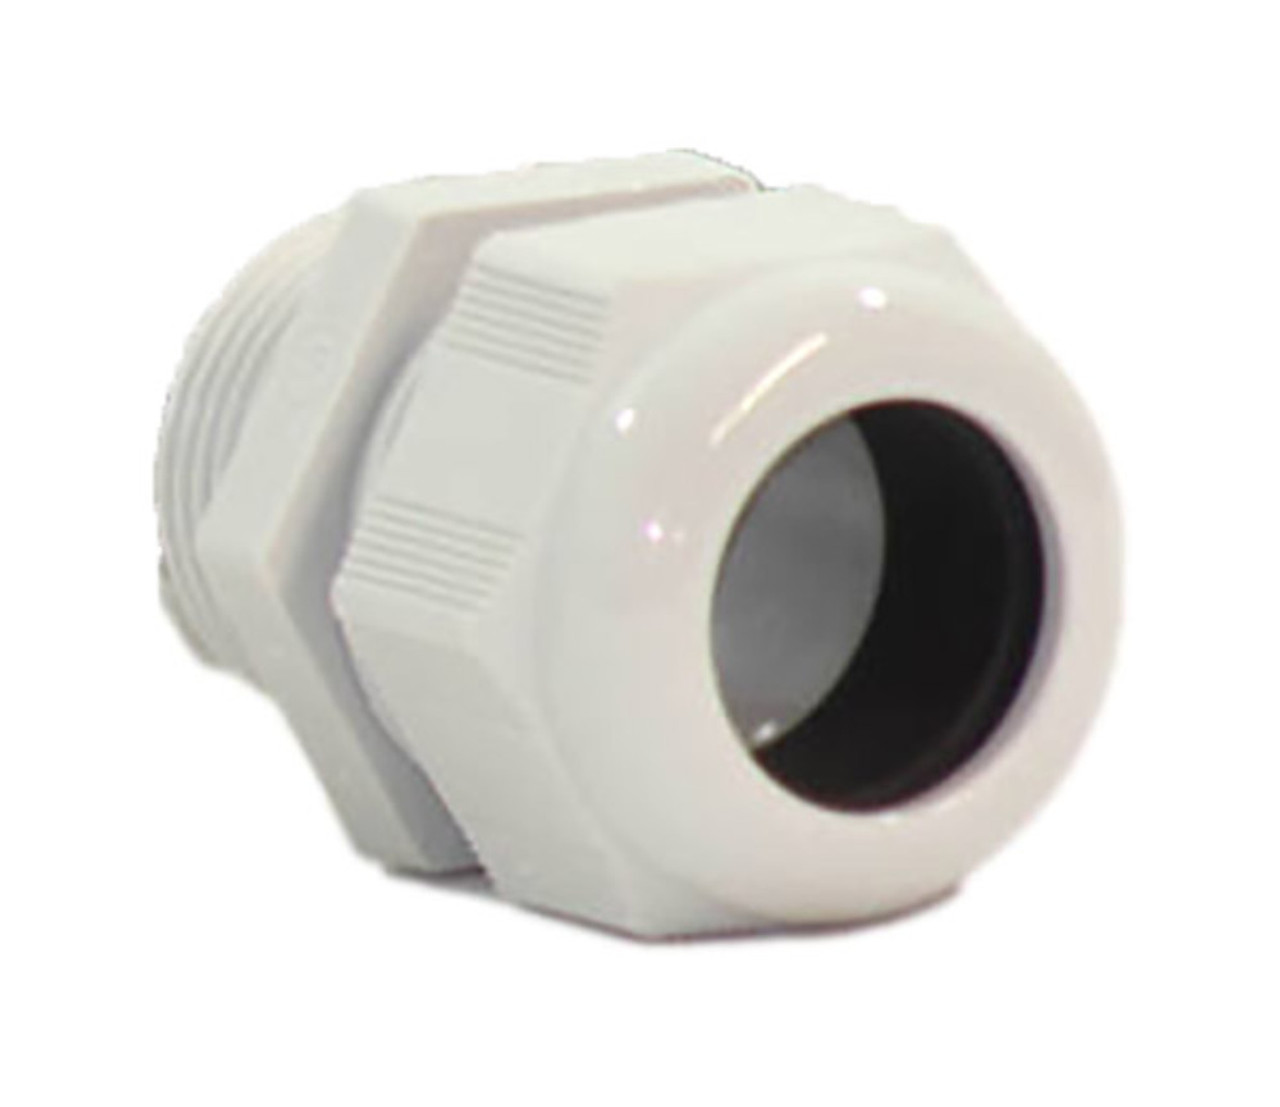 Remke RD29NA-GY Cable Gland Material: Nylon Color: Grey Size: 1 Inch